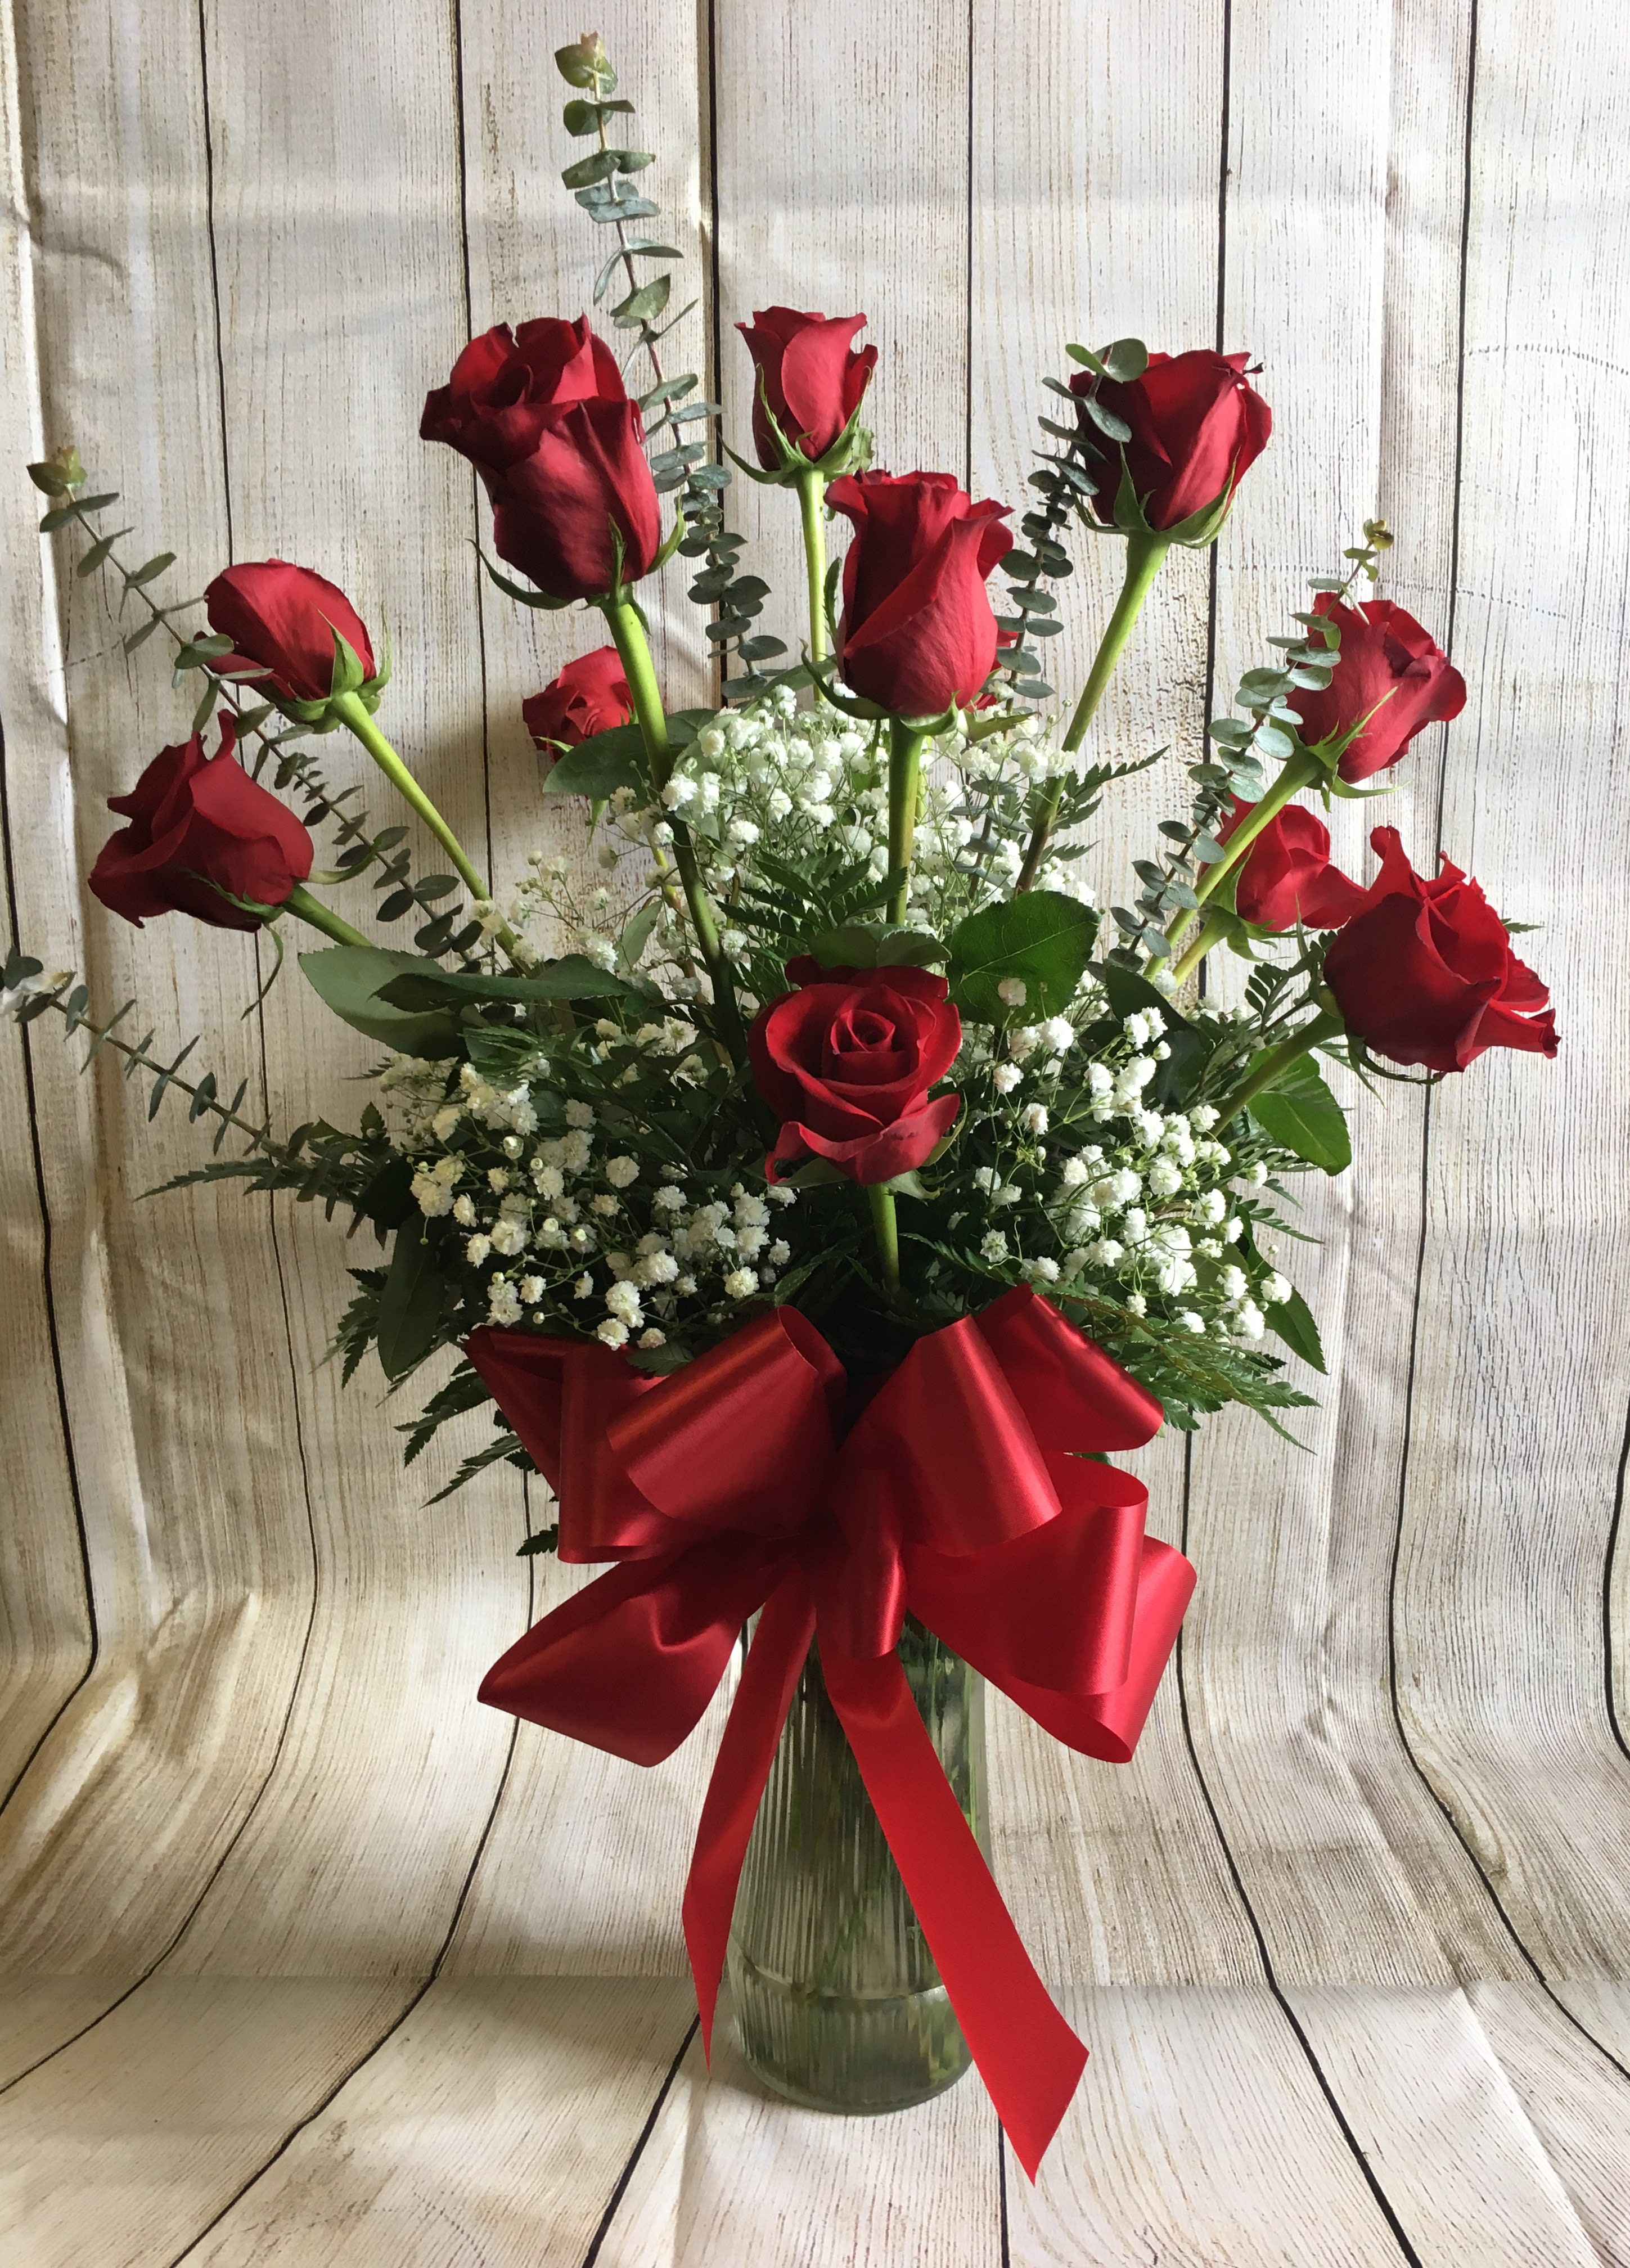 Dozen Red Roses - A dozen red roses are always perfect, always savored. A traditional, beautiful way to express your love. Color of bow and filler will vary. Available in red, pink, white, yellow, lavender, orange and mixed with special request. Most colors available within a 24 hour notice.